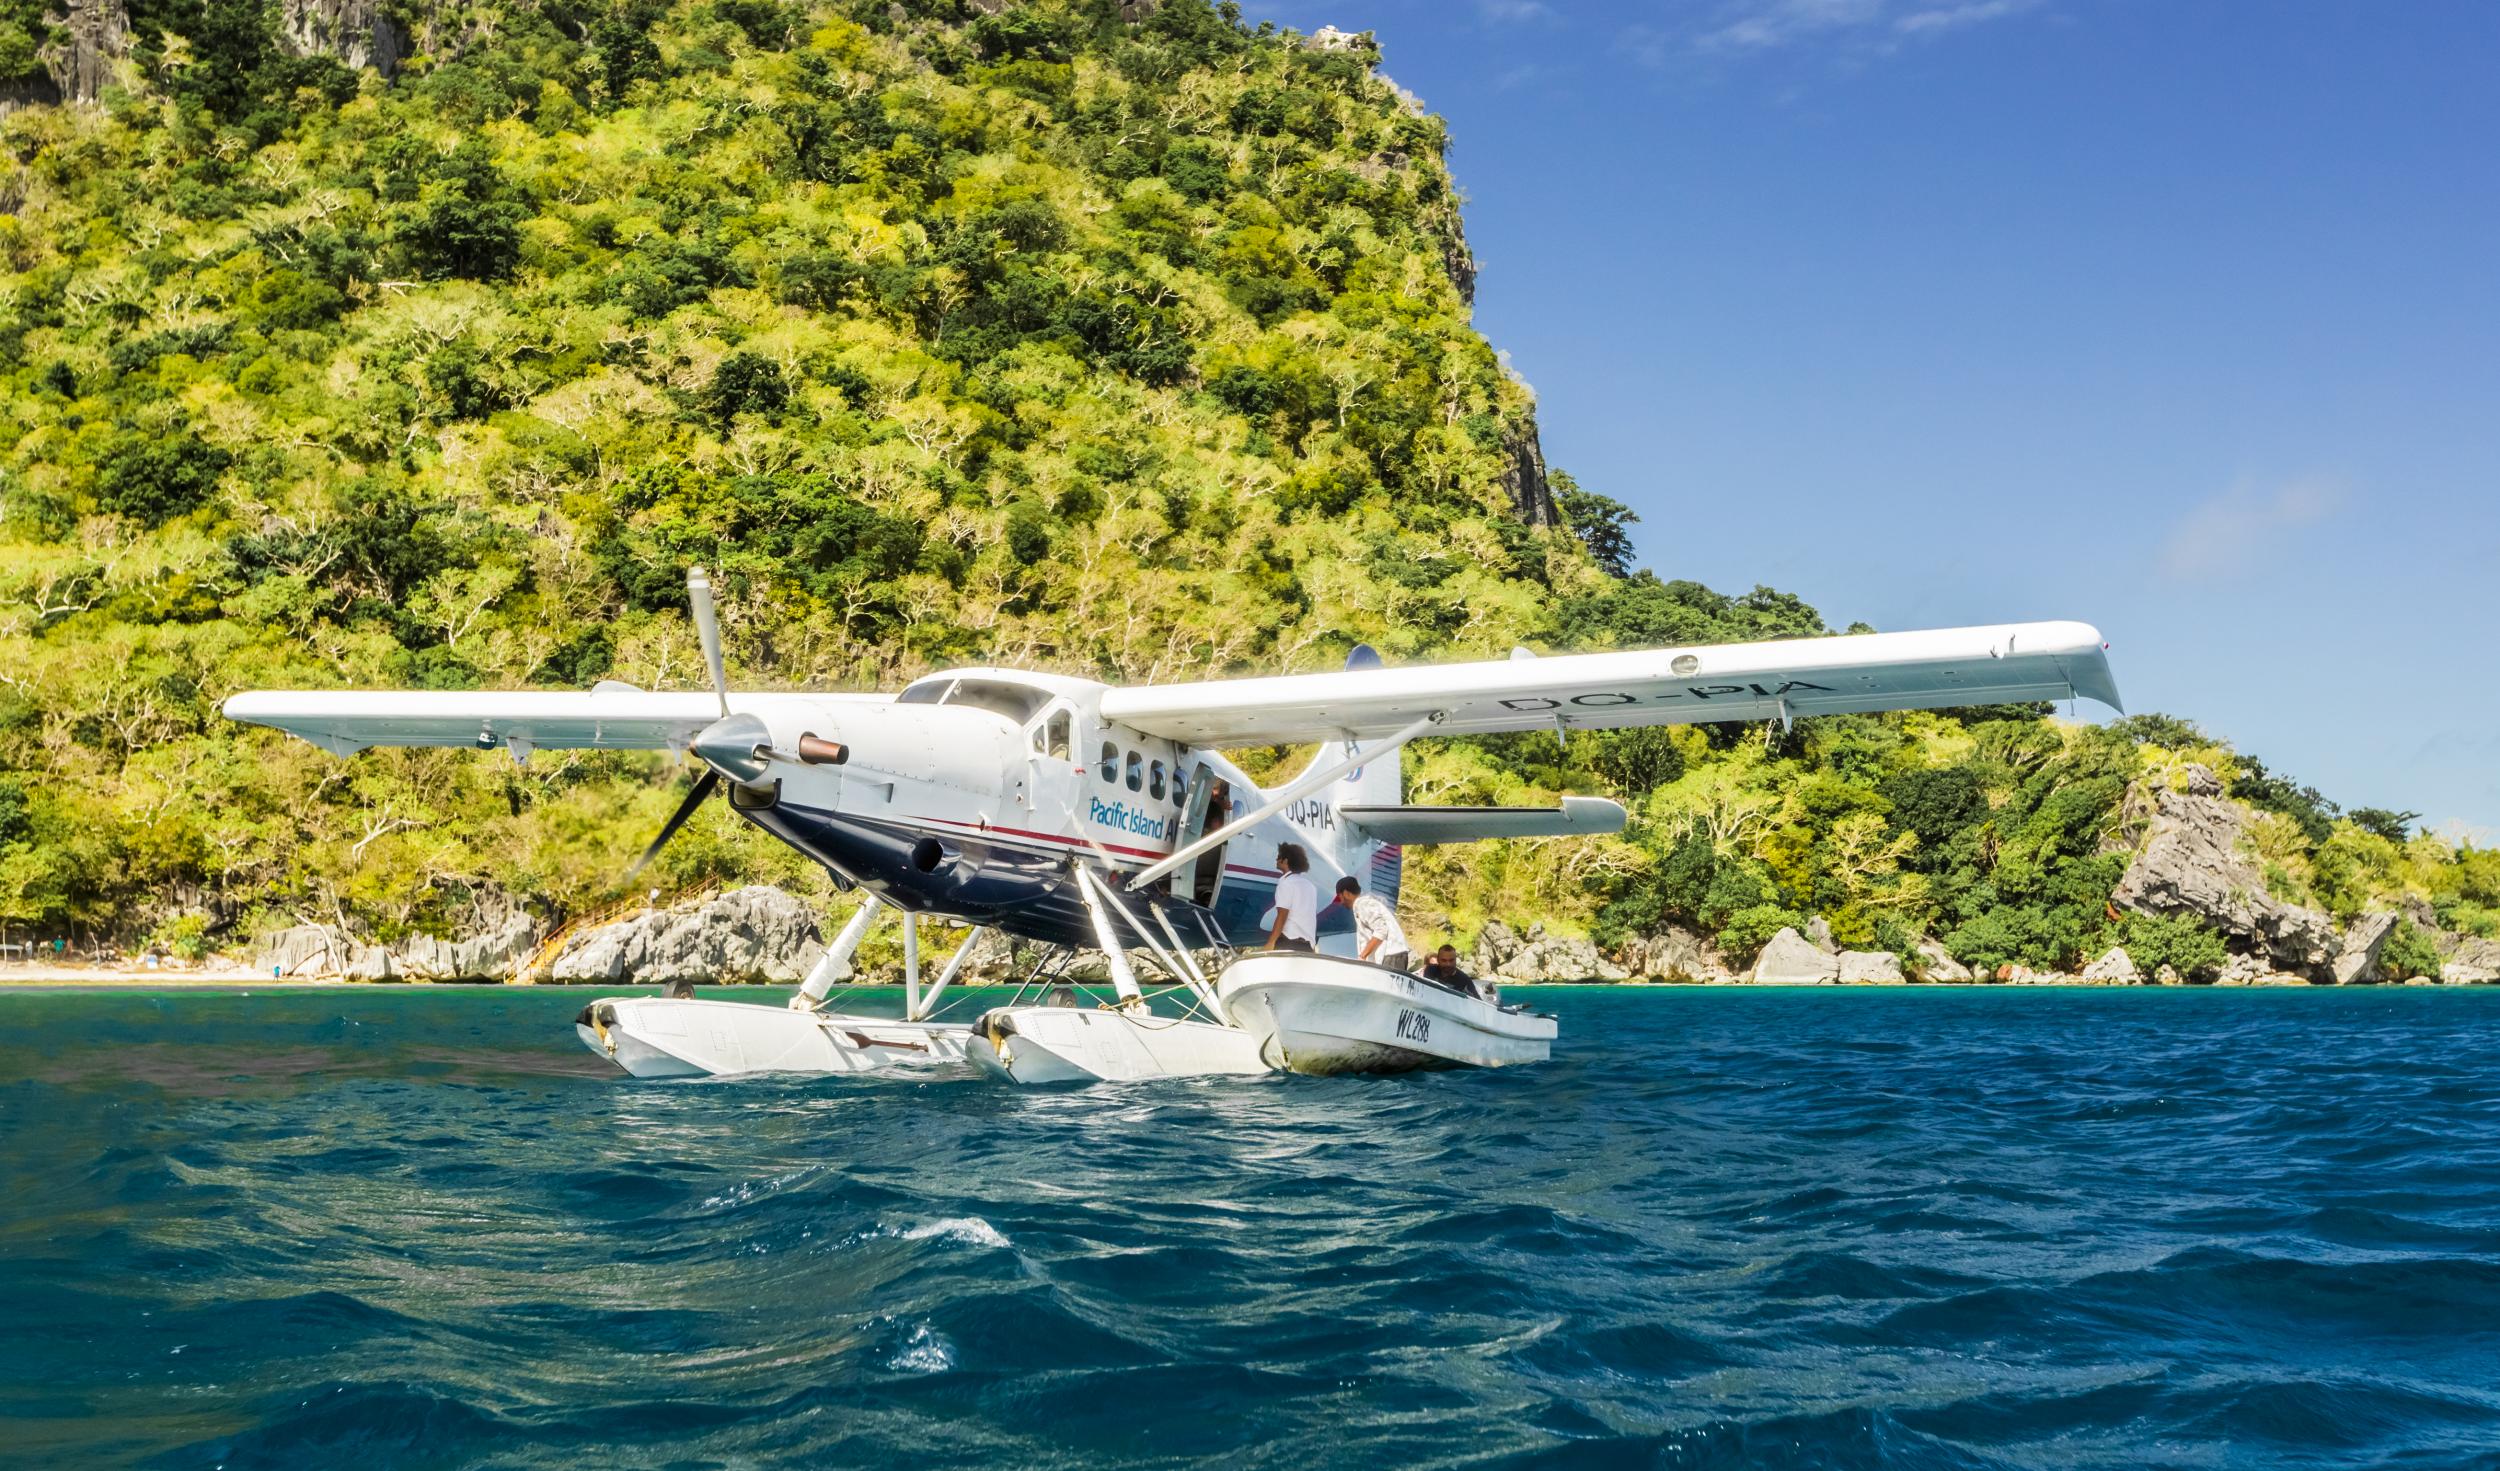 Flying by seaplane is the best way to see the islands